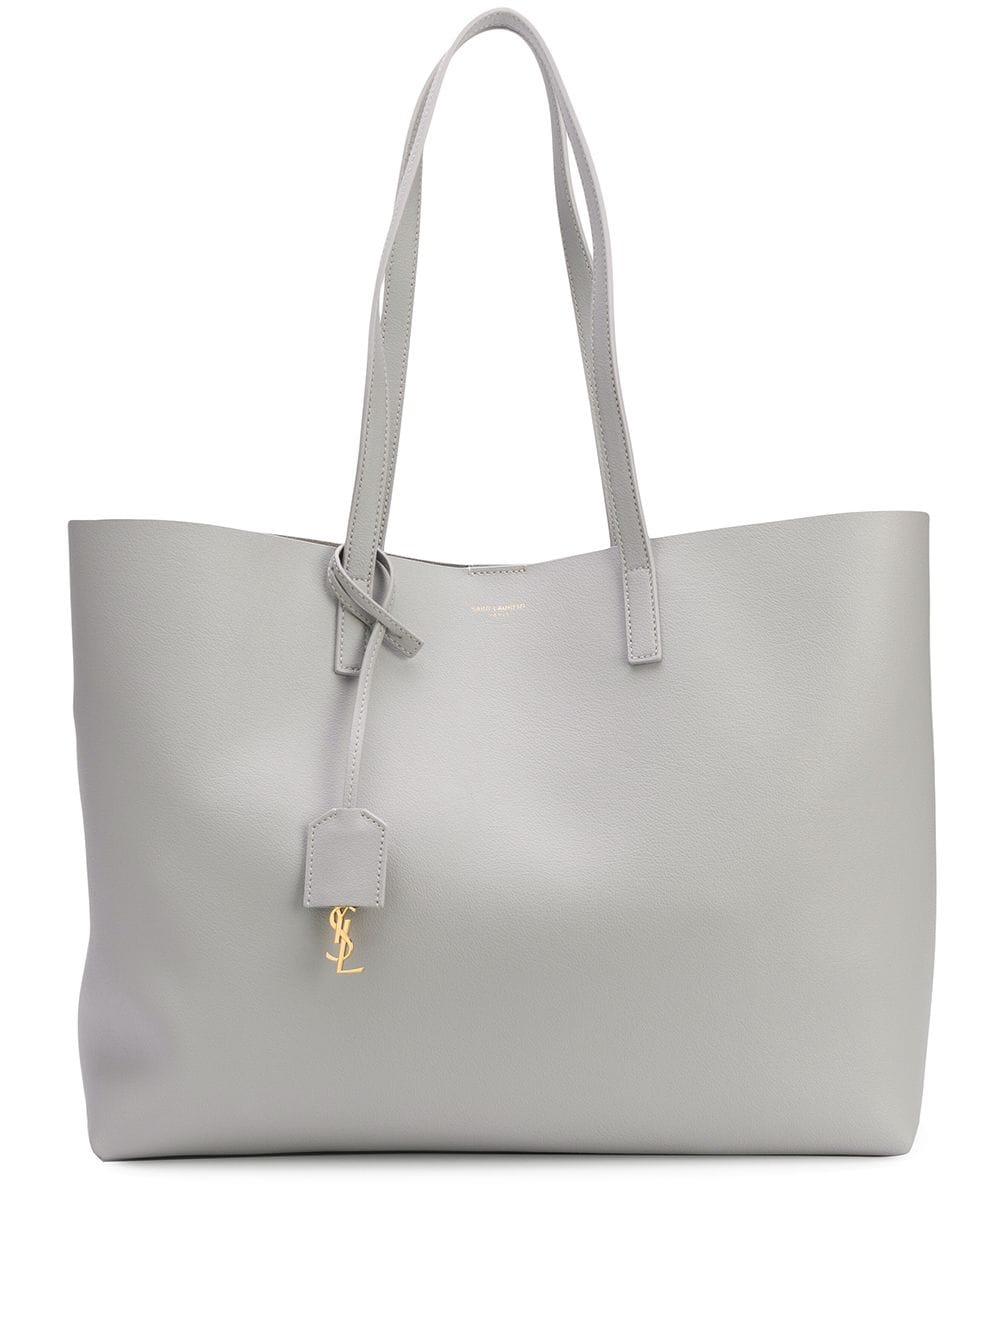 Saint Laurent Leather Shopping Bag in Gray | Lyst